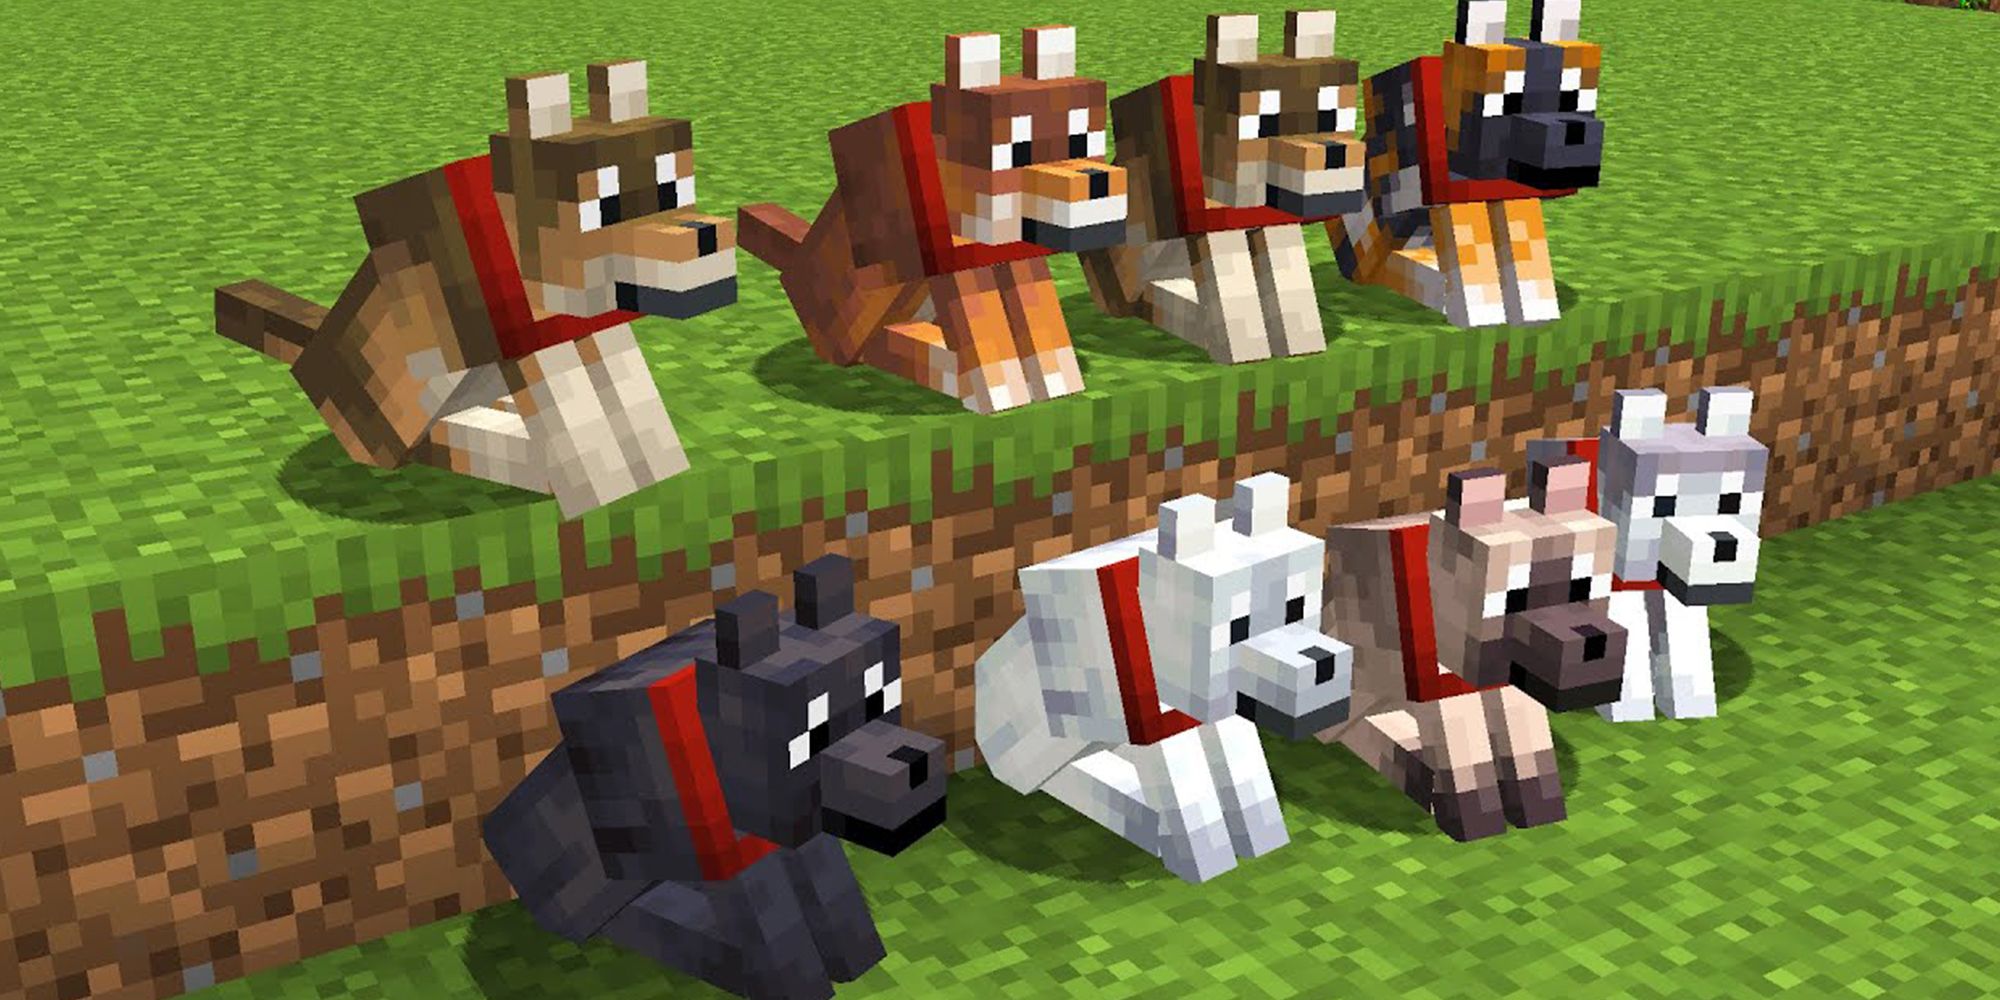 Every Type Of Dog In Minecraft